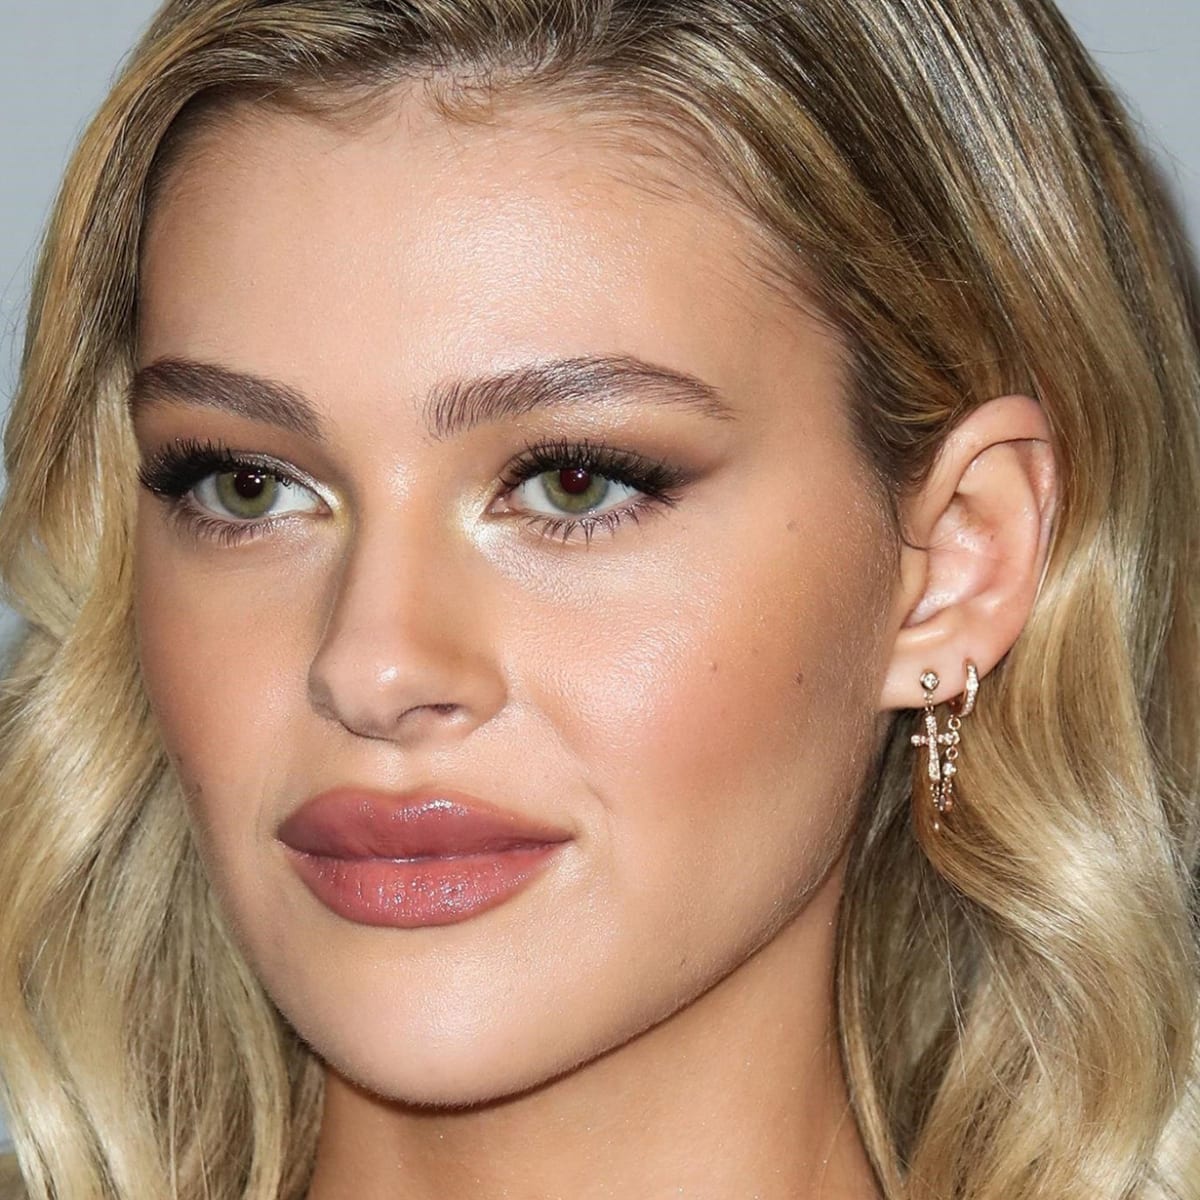 Nicola Peltz, Before and After - The Skincare Edit